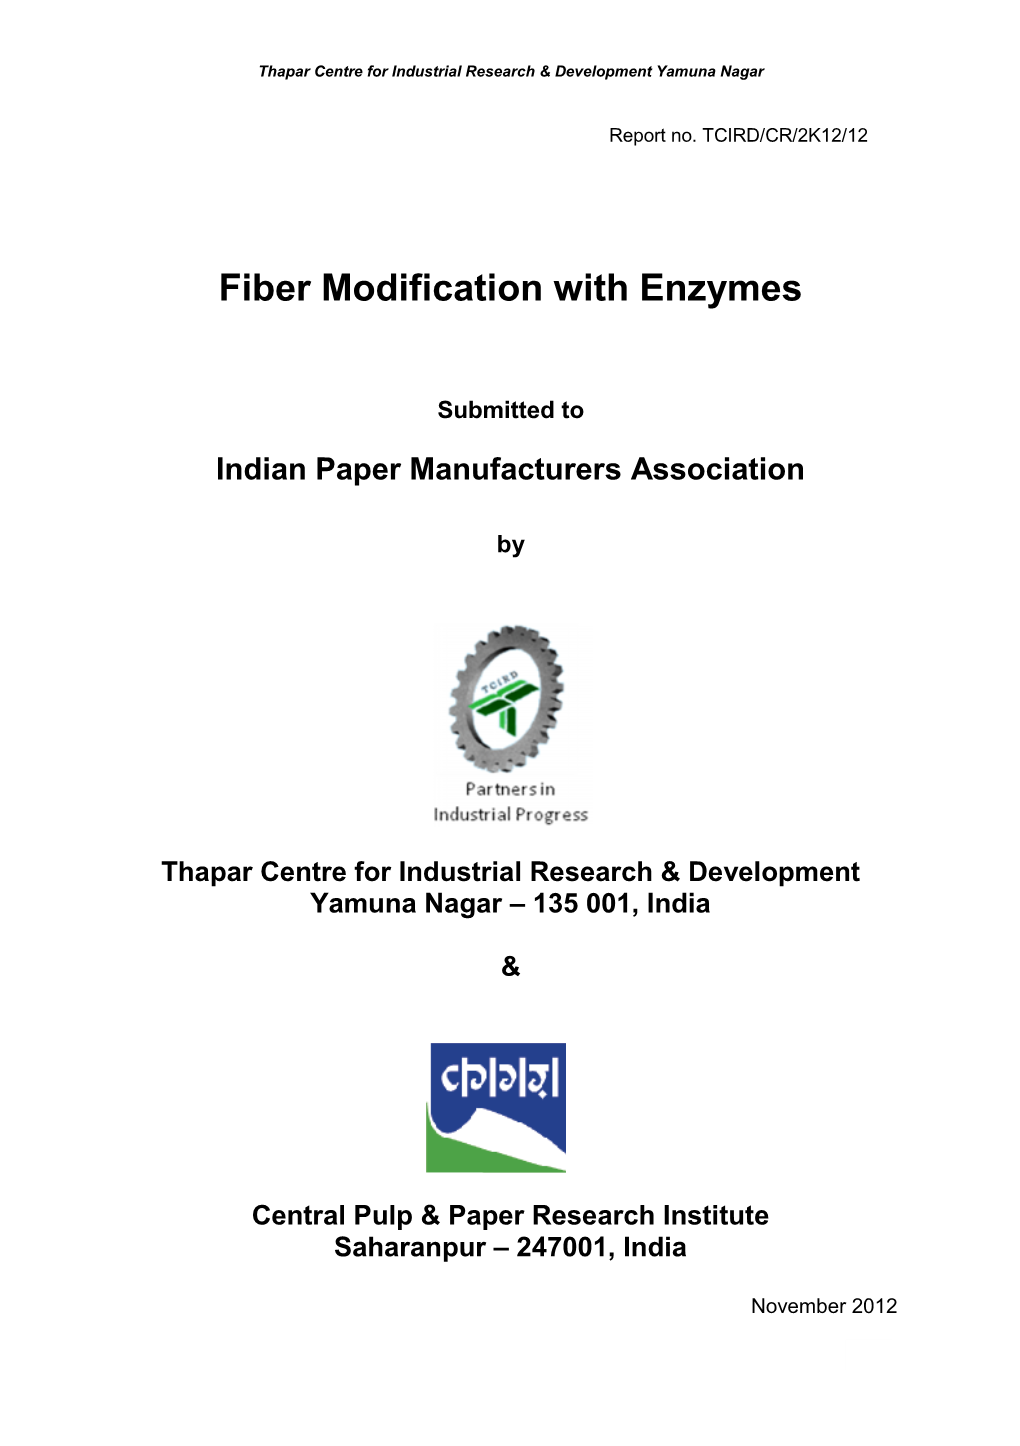 Fiber Modification with Enzymes